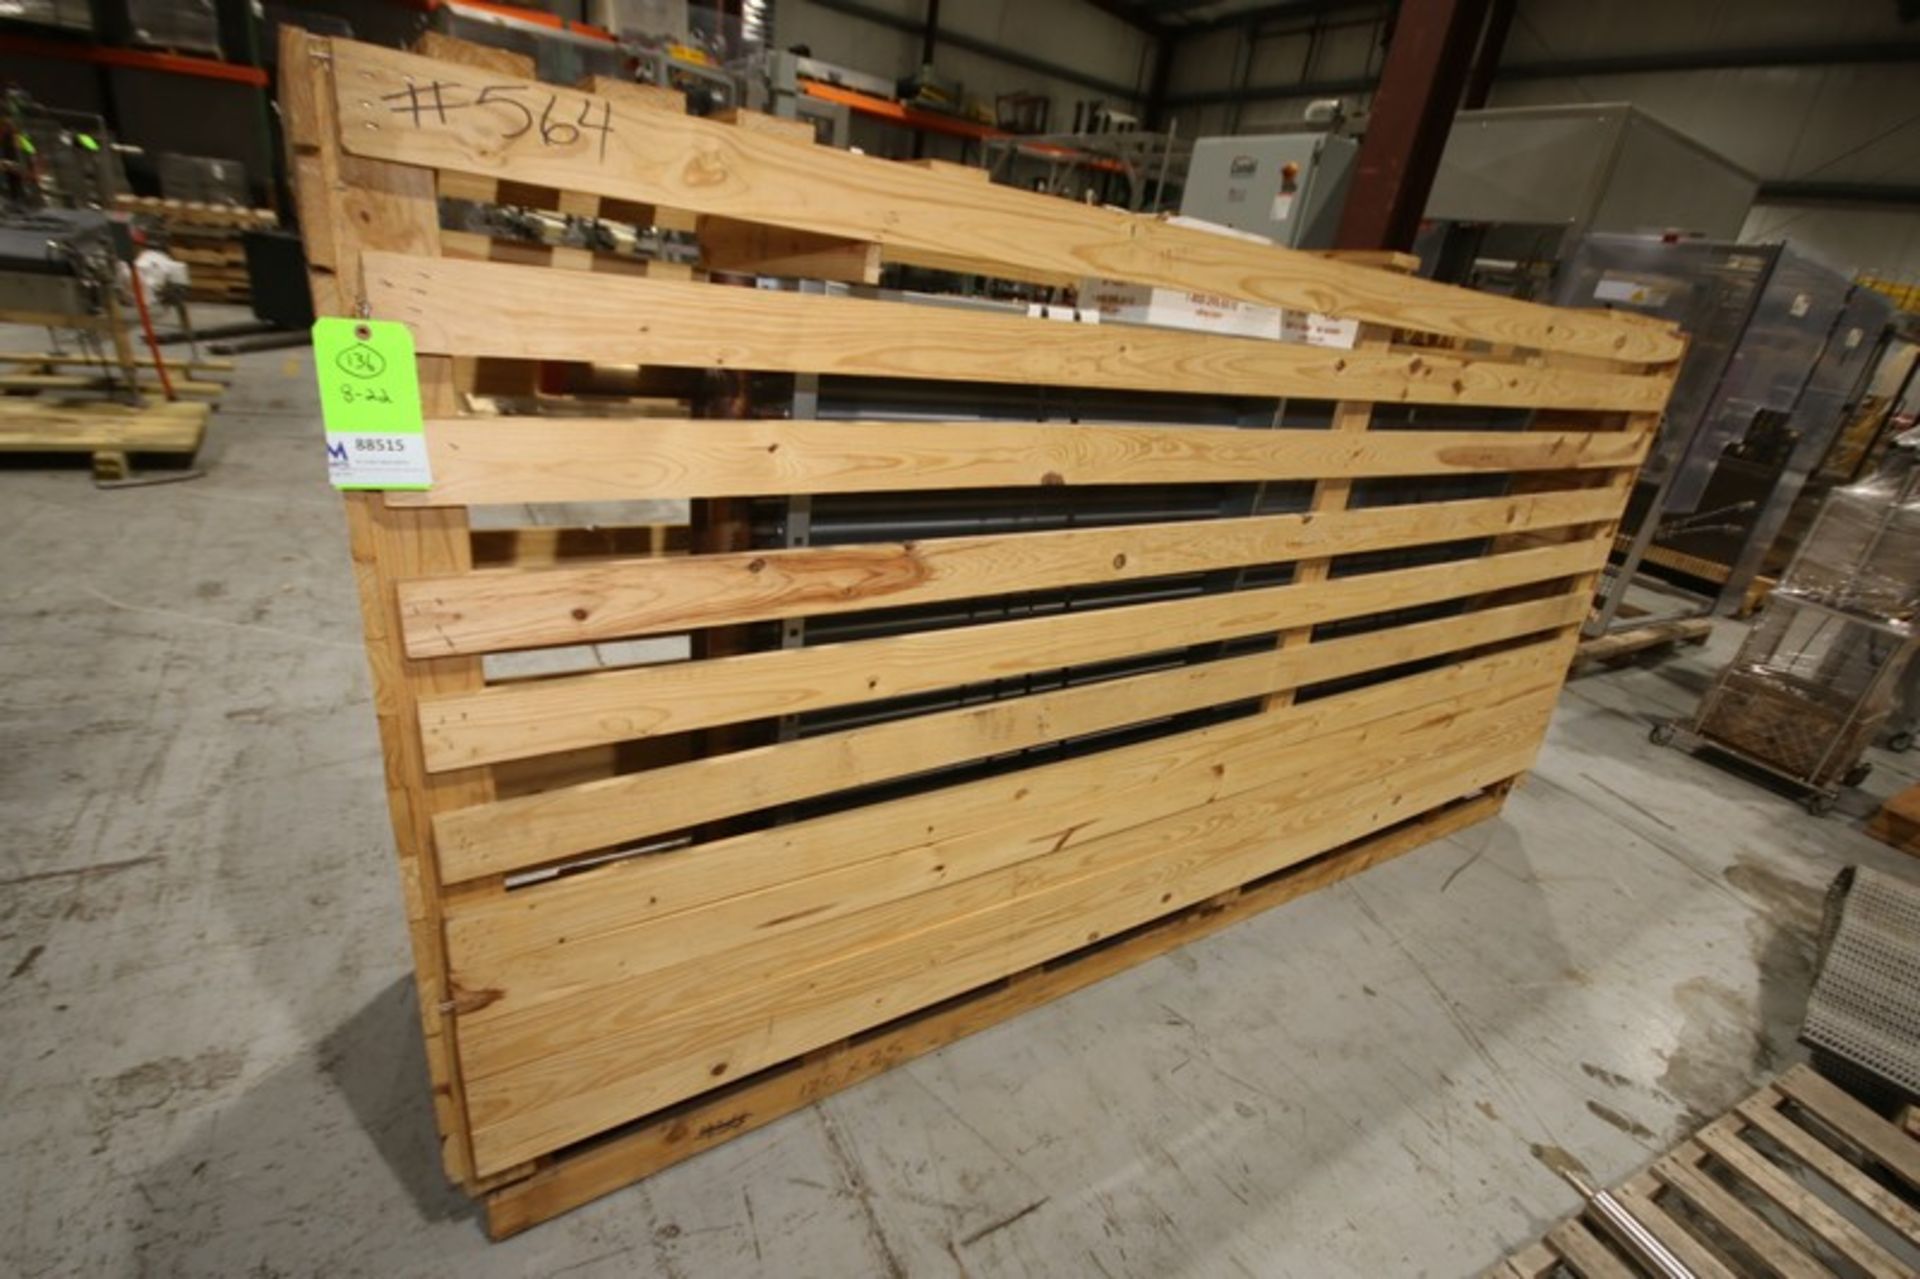 New Climate Craft Inc. 89" L x 48" H x 10" W Aluminum Coil, New in Crate, SN 25229 (INV#88515)(